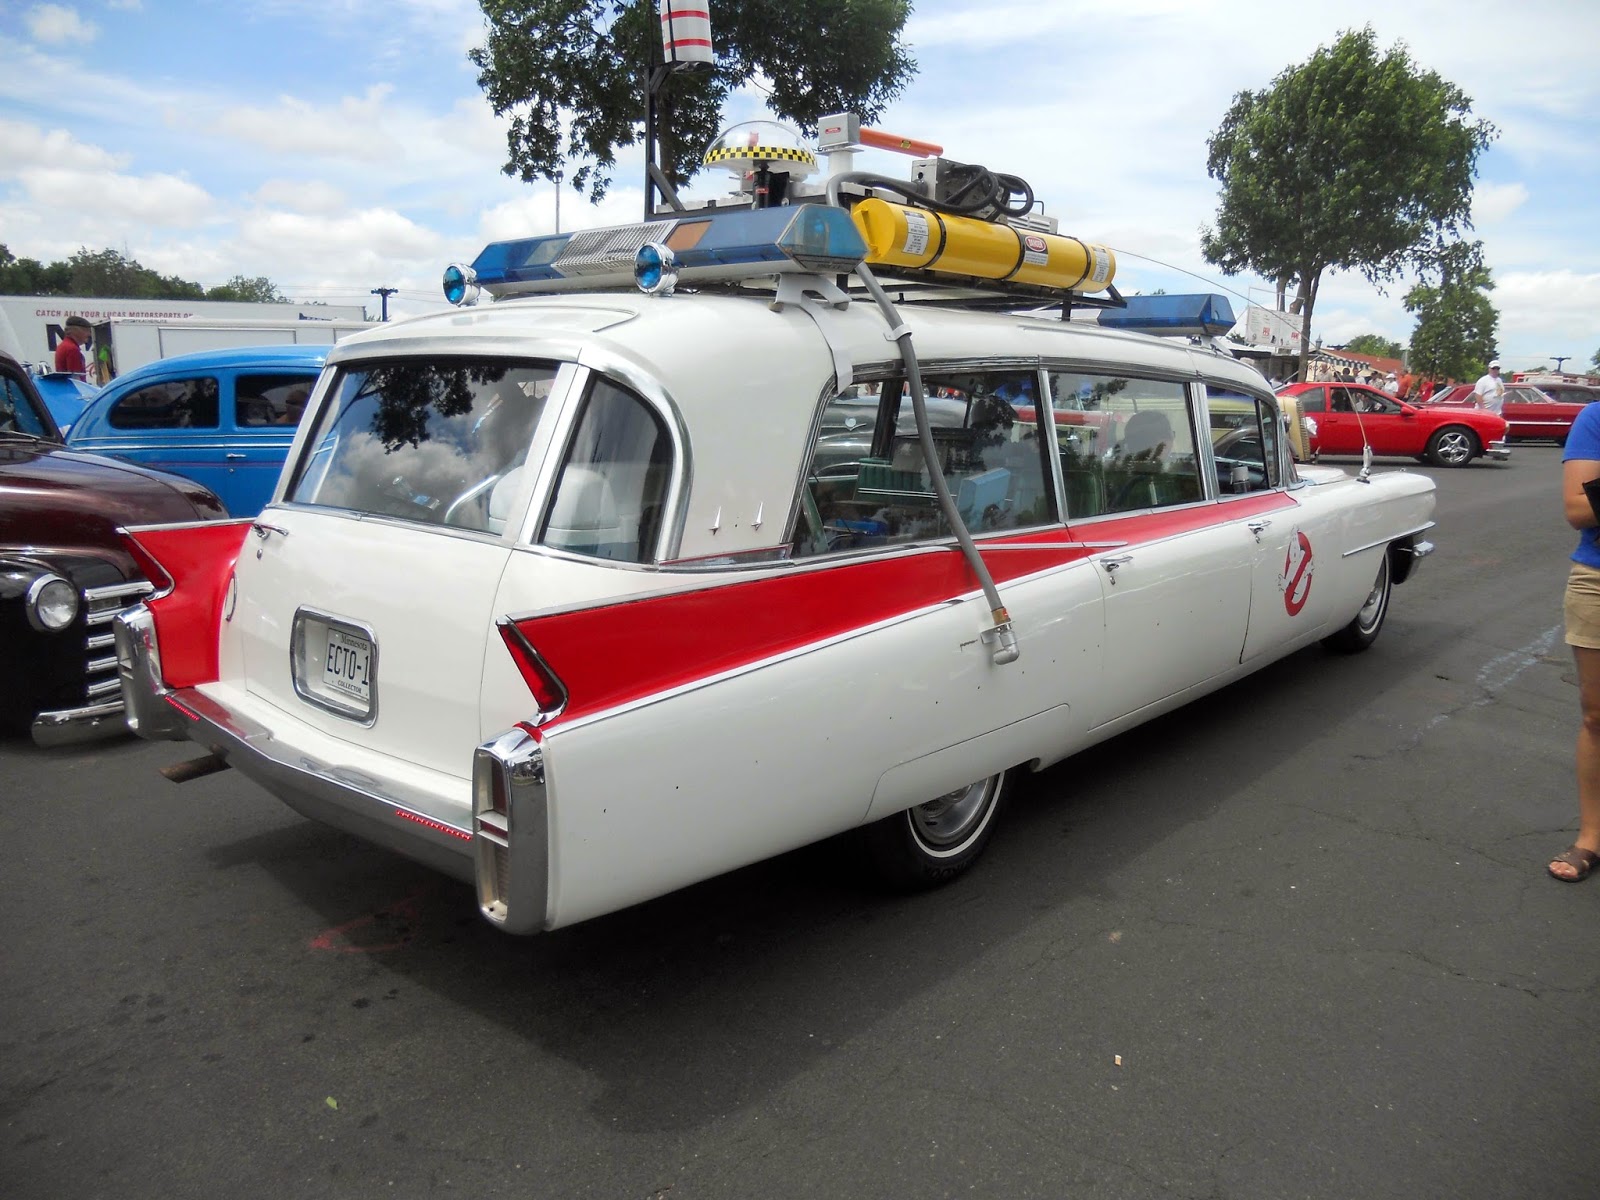 Ghostbusters ECTO-1, The actual 1959 $150,000 Cadillac Ghos…